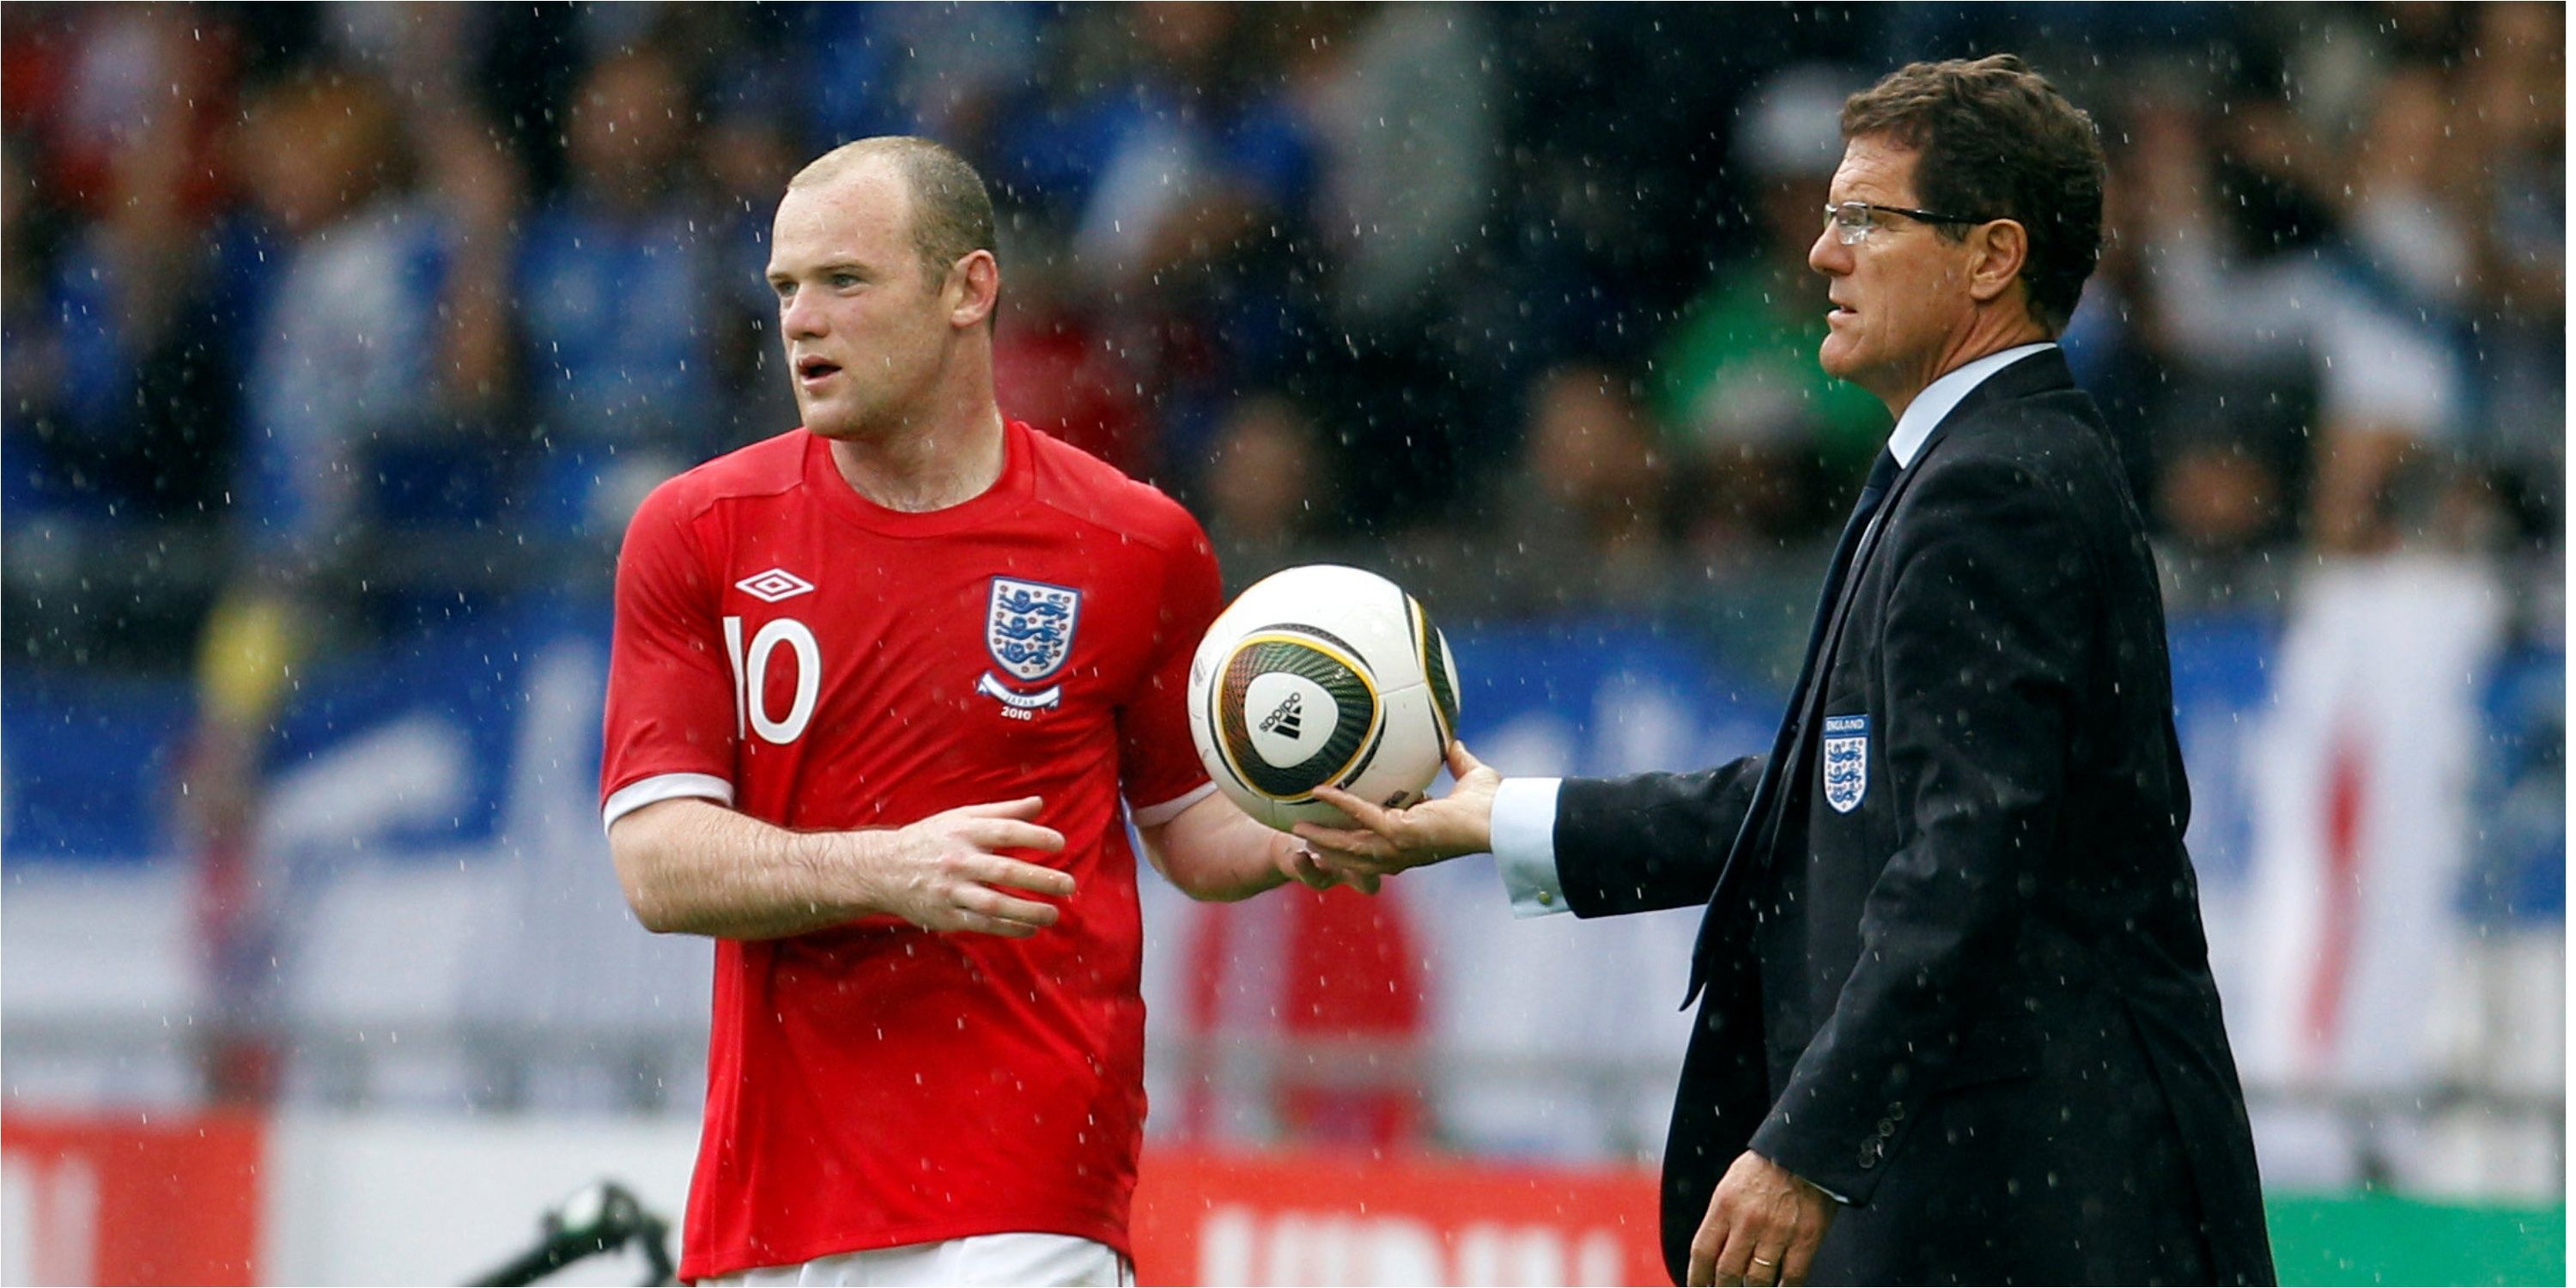 Fabio-Capello-and-Wayne-Rooney-at-World-Cup-2010